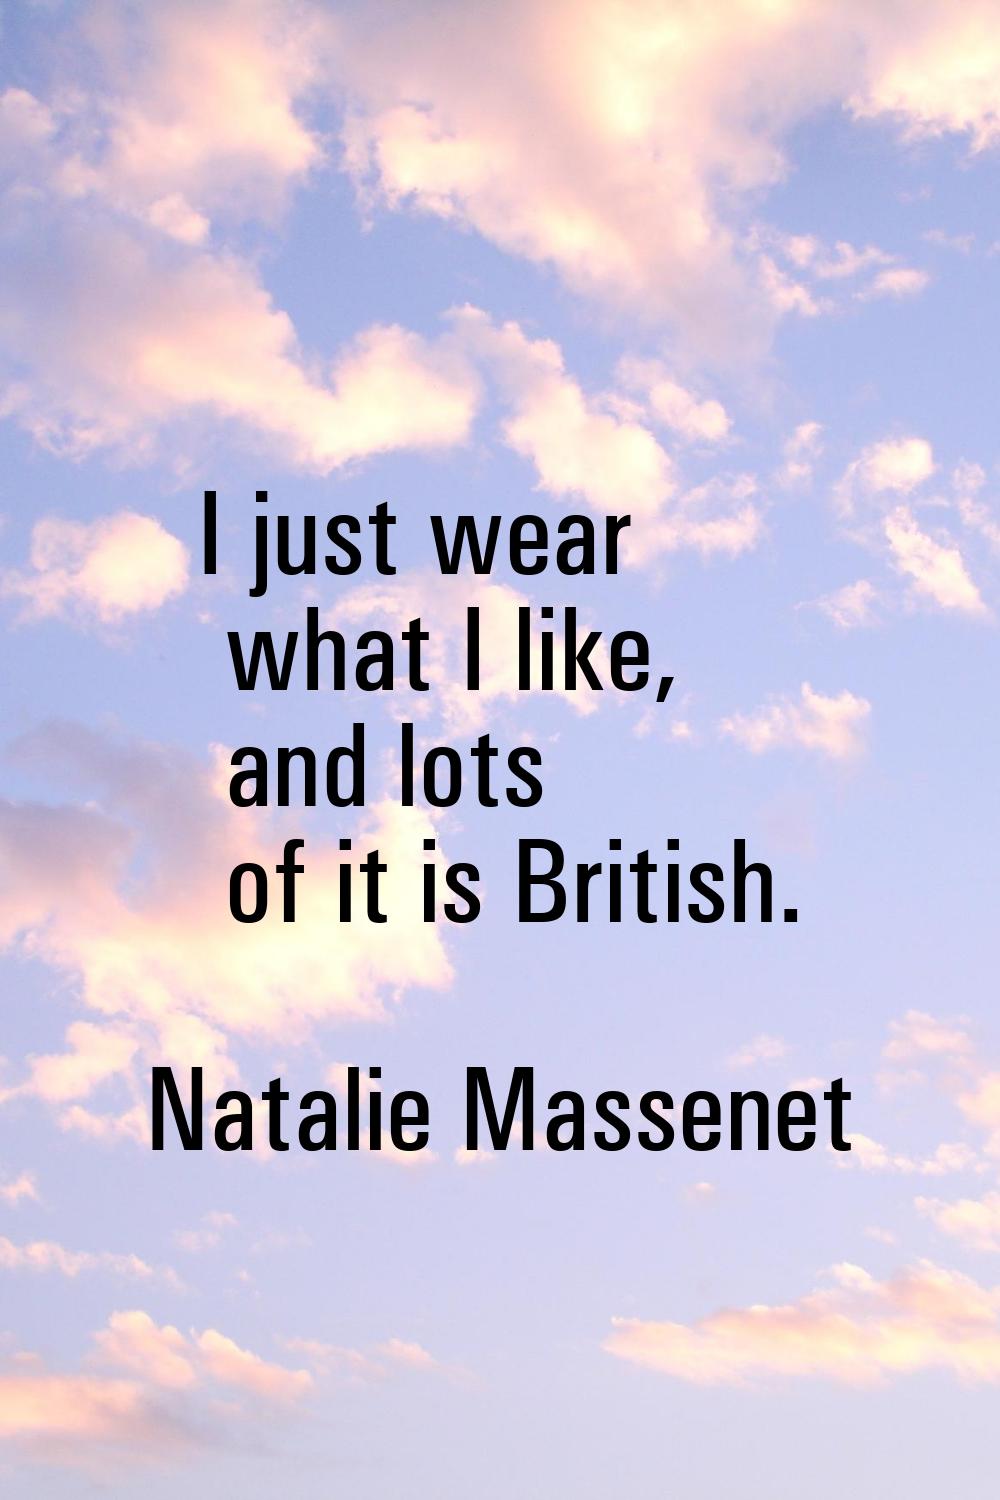 I just wear what I like, and lots of it is British.